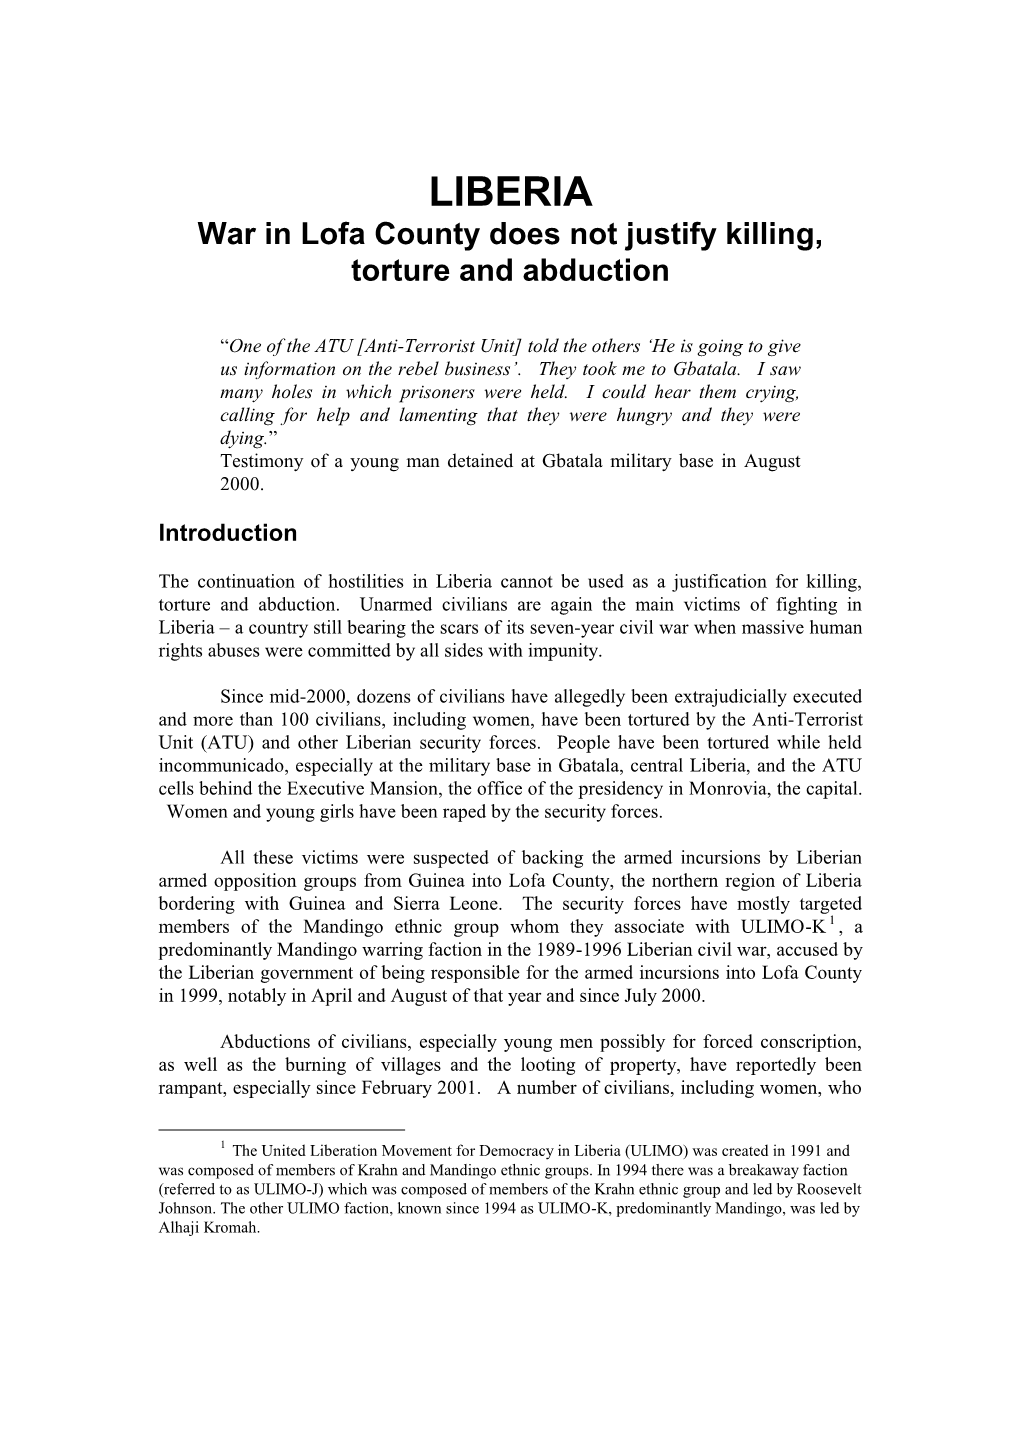 LIBERIA War in Lofa County Does Not Justify Killing, Torture and Abduction